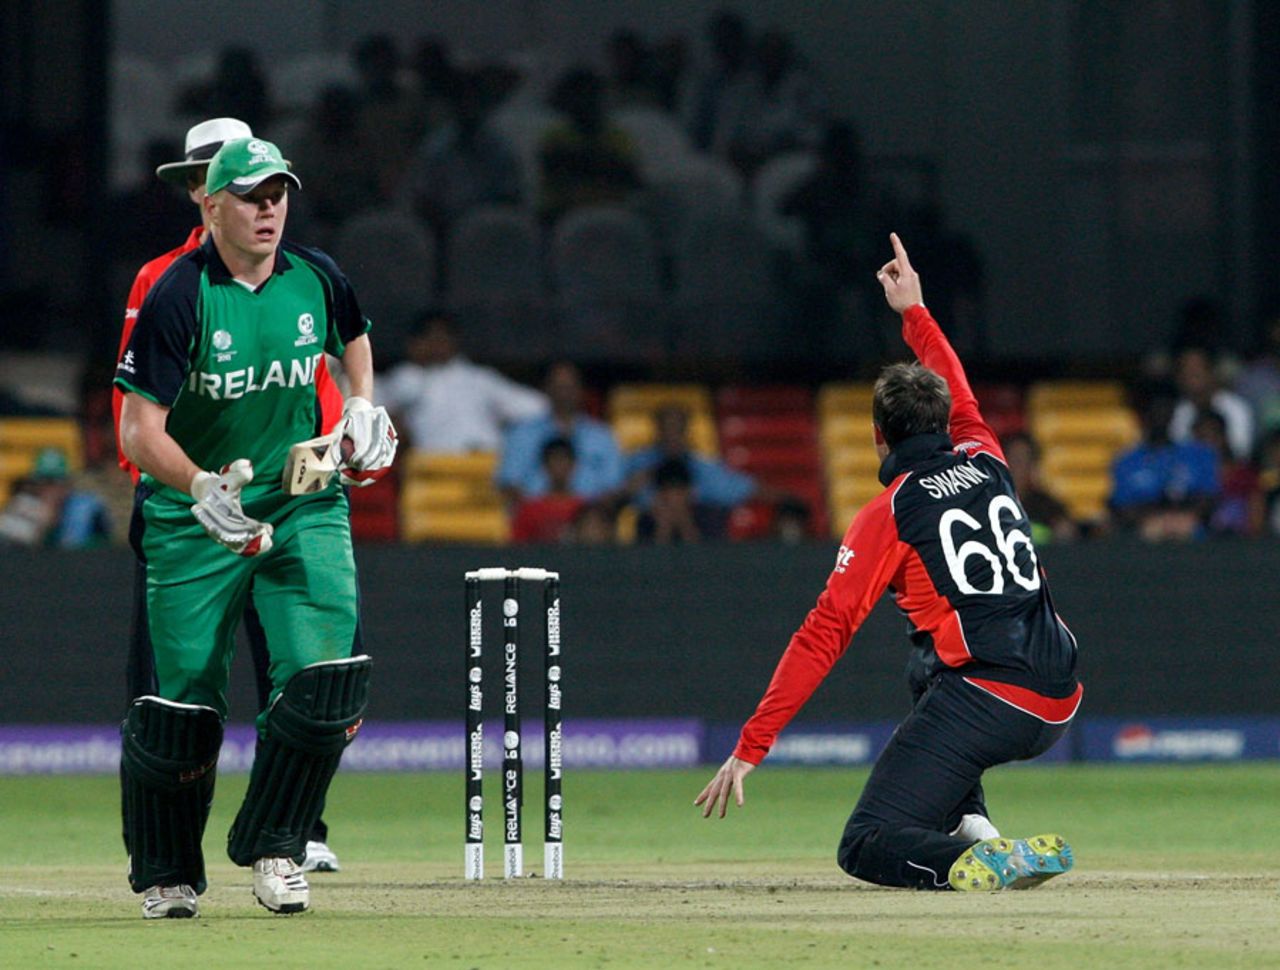 Graeme Swann successfully appealed for lbw against Gary Wilson, England v Ireland, World Cup 2011, Bangalore, March 2, 2011